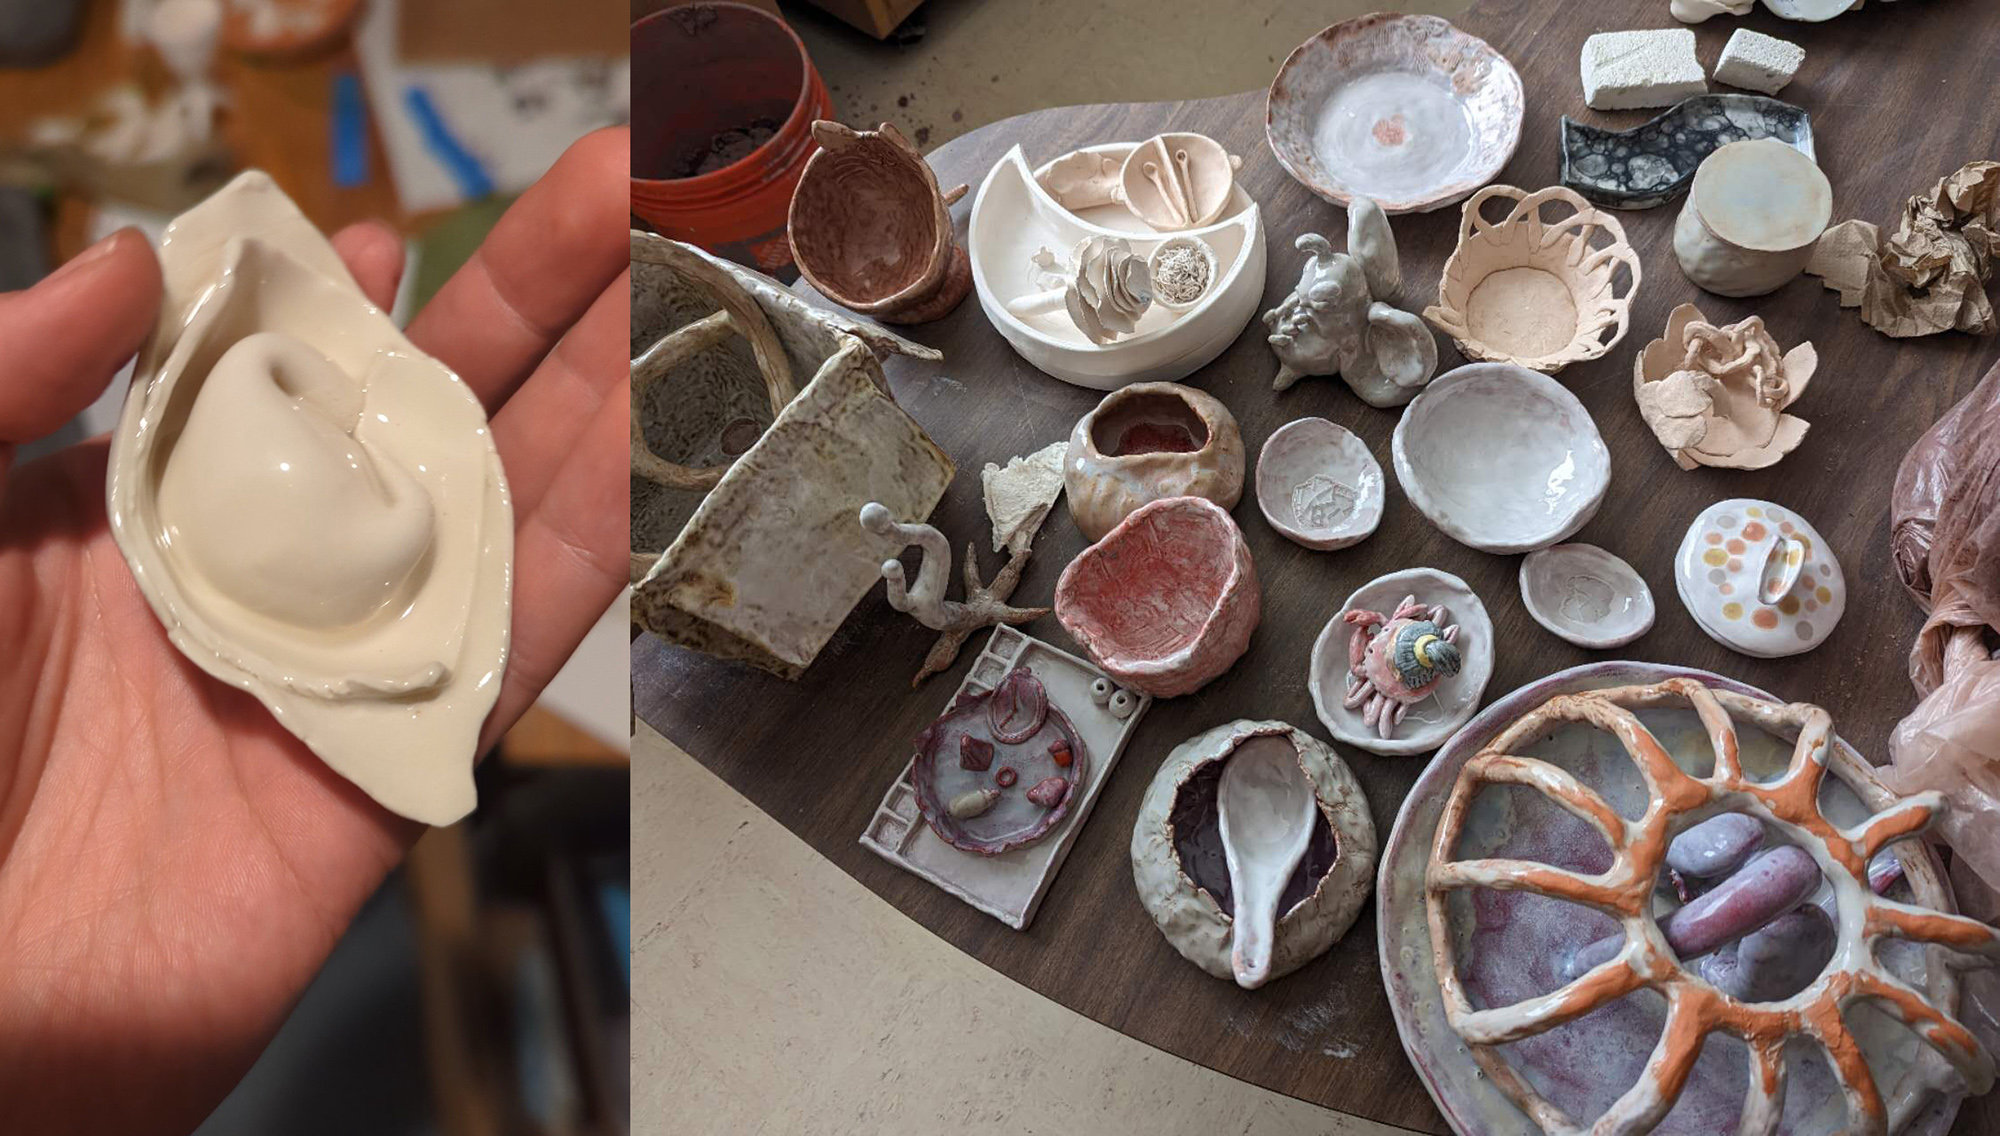 Two images, both of ceramics. Left image is a hand holding a ceramic dumpling, right image is an assortment of various other ceramic objects.